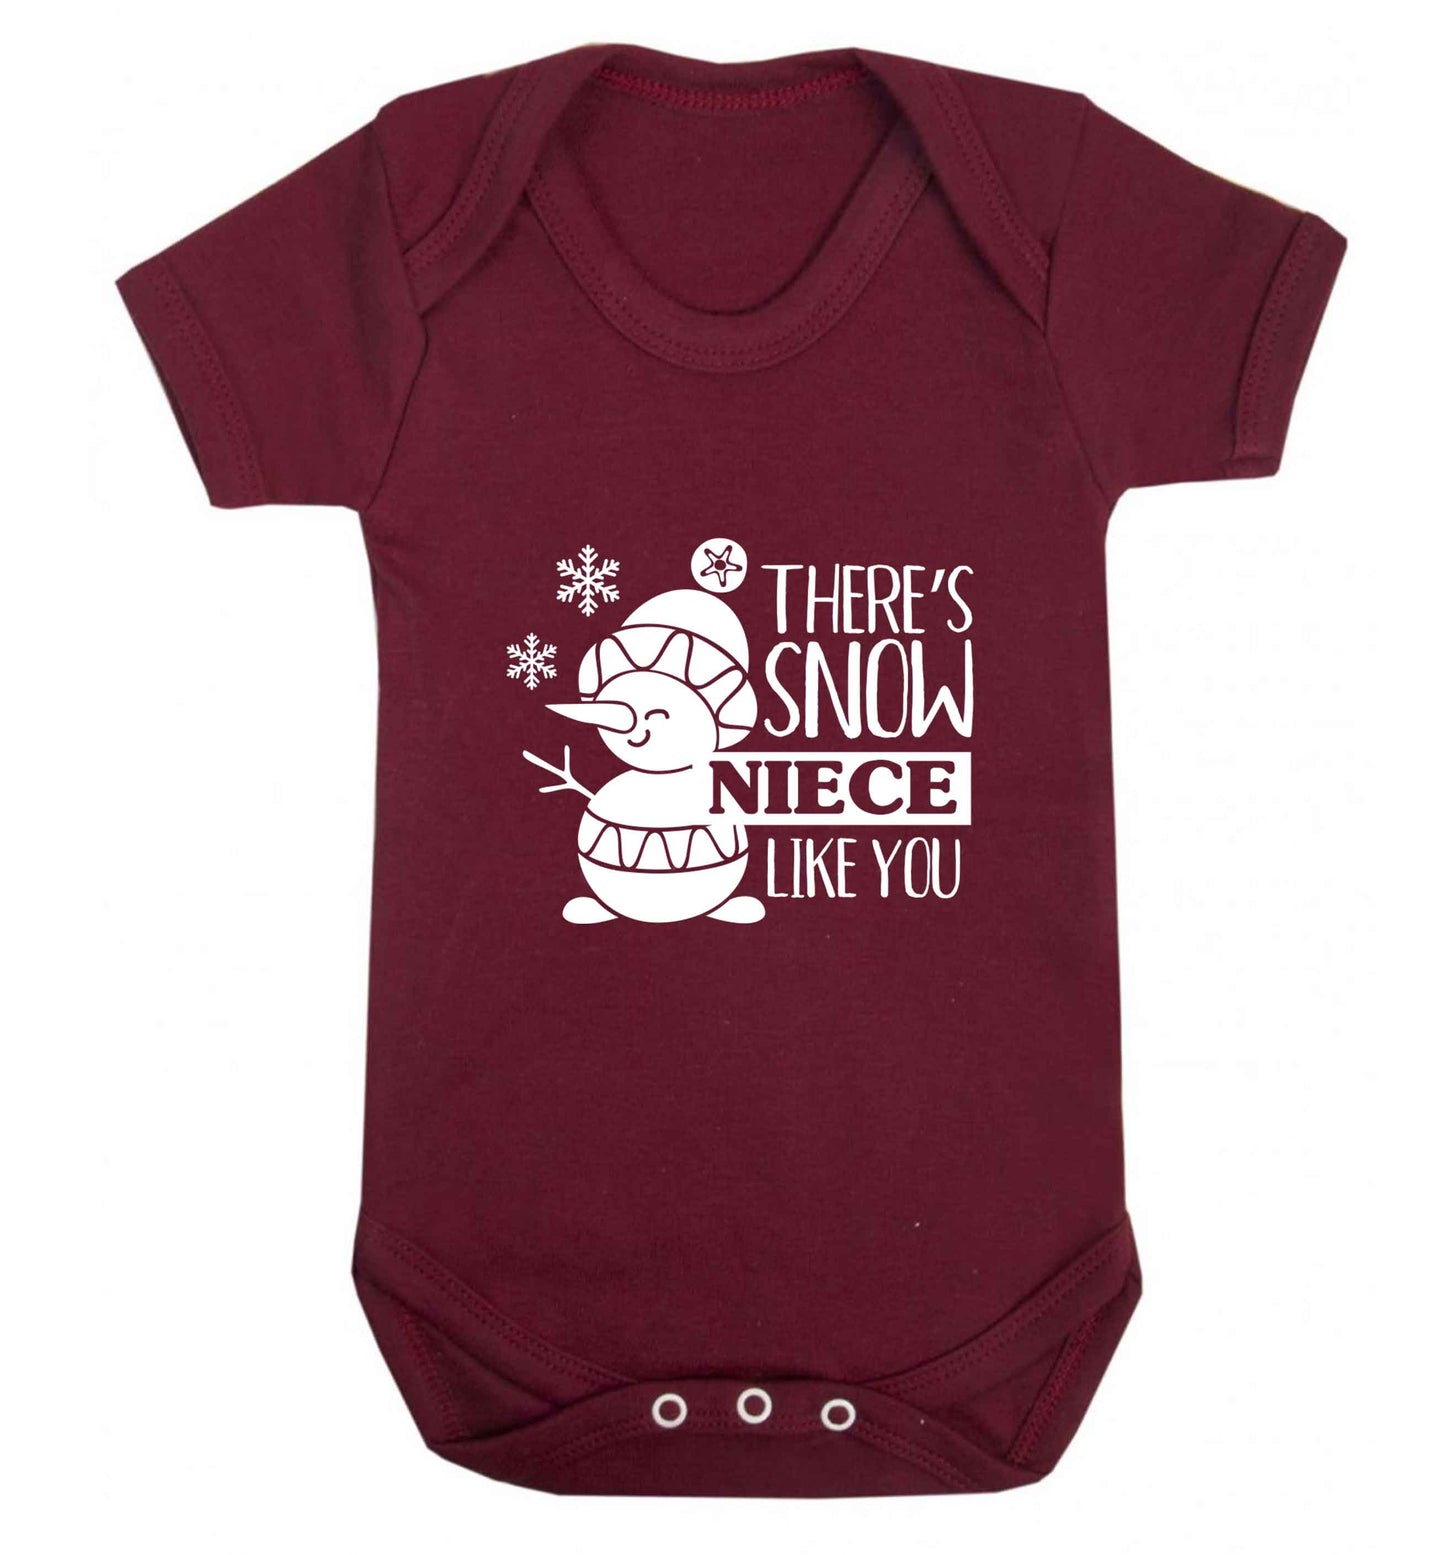 There's snow niece like you baby vest maroon 18-24 months